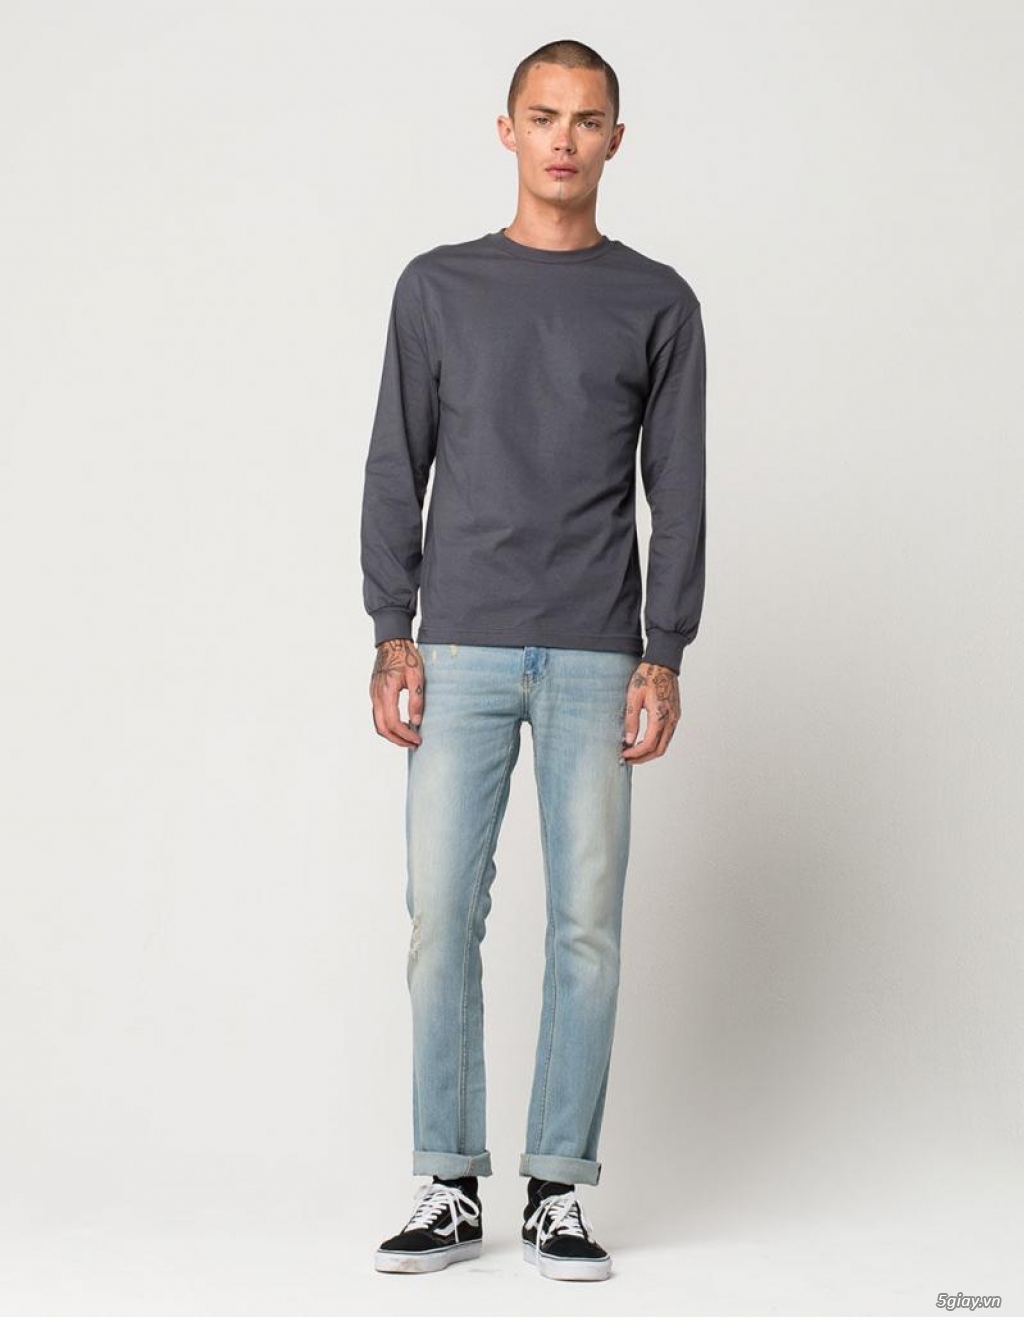 Rsq London Skinny Jeans End 22h5918/8/2019 - 3